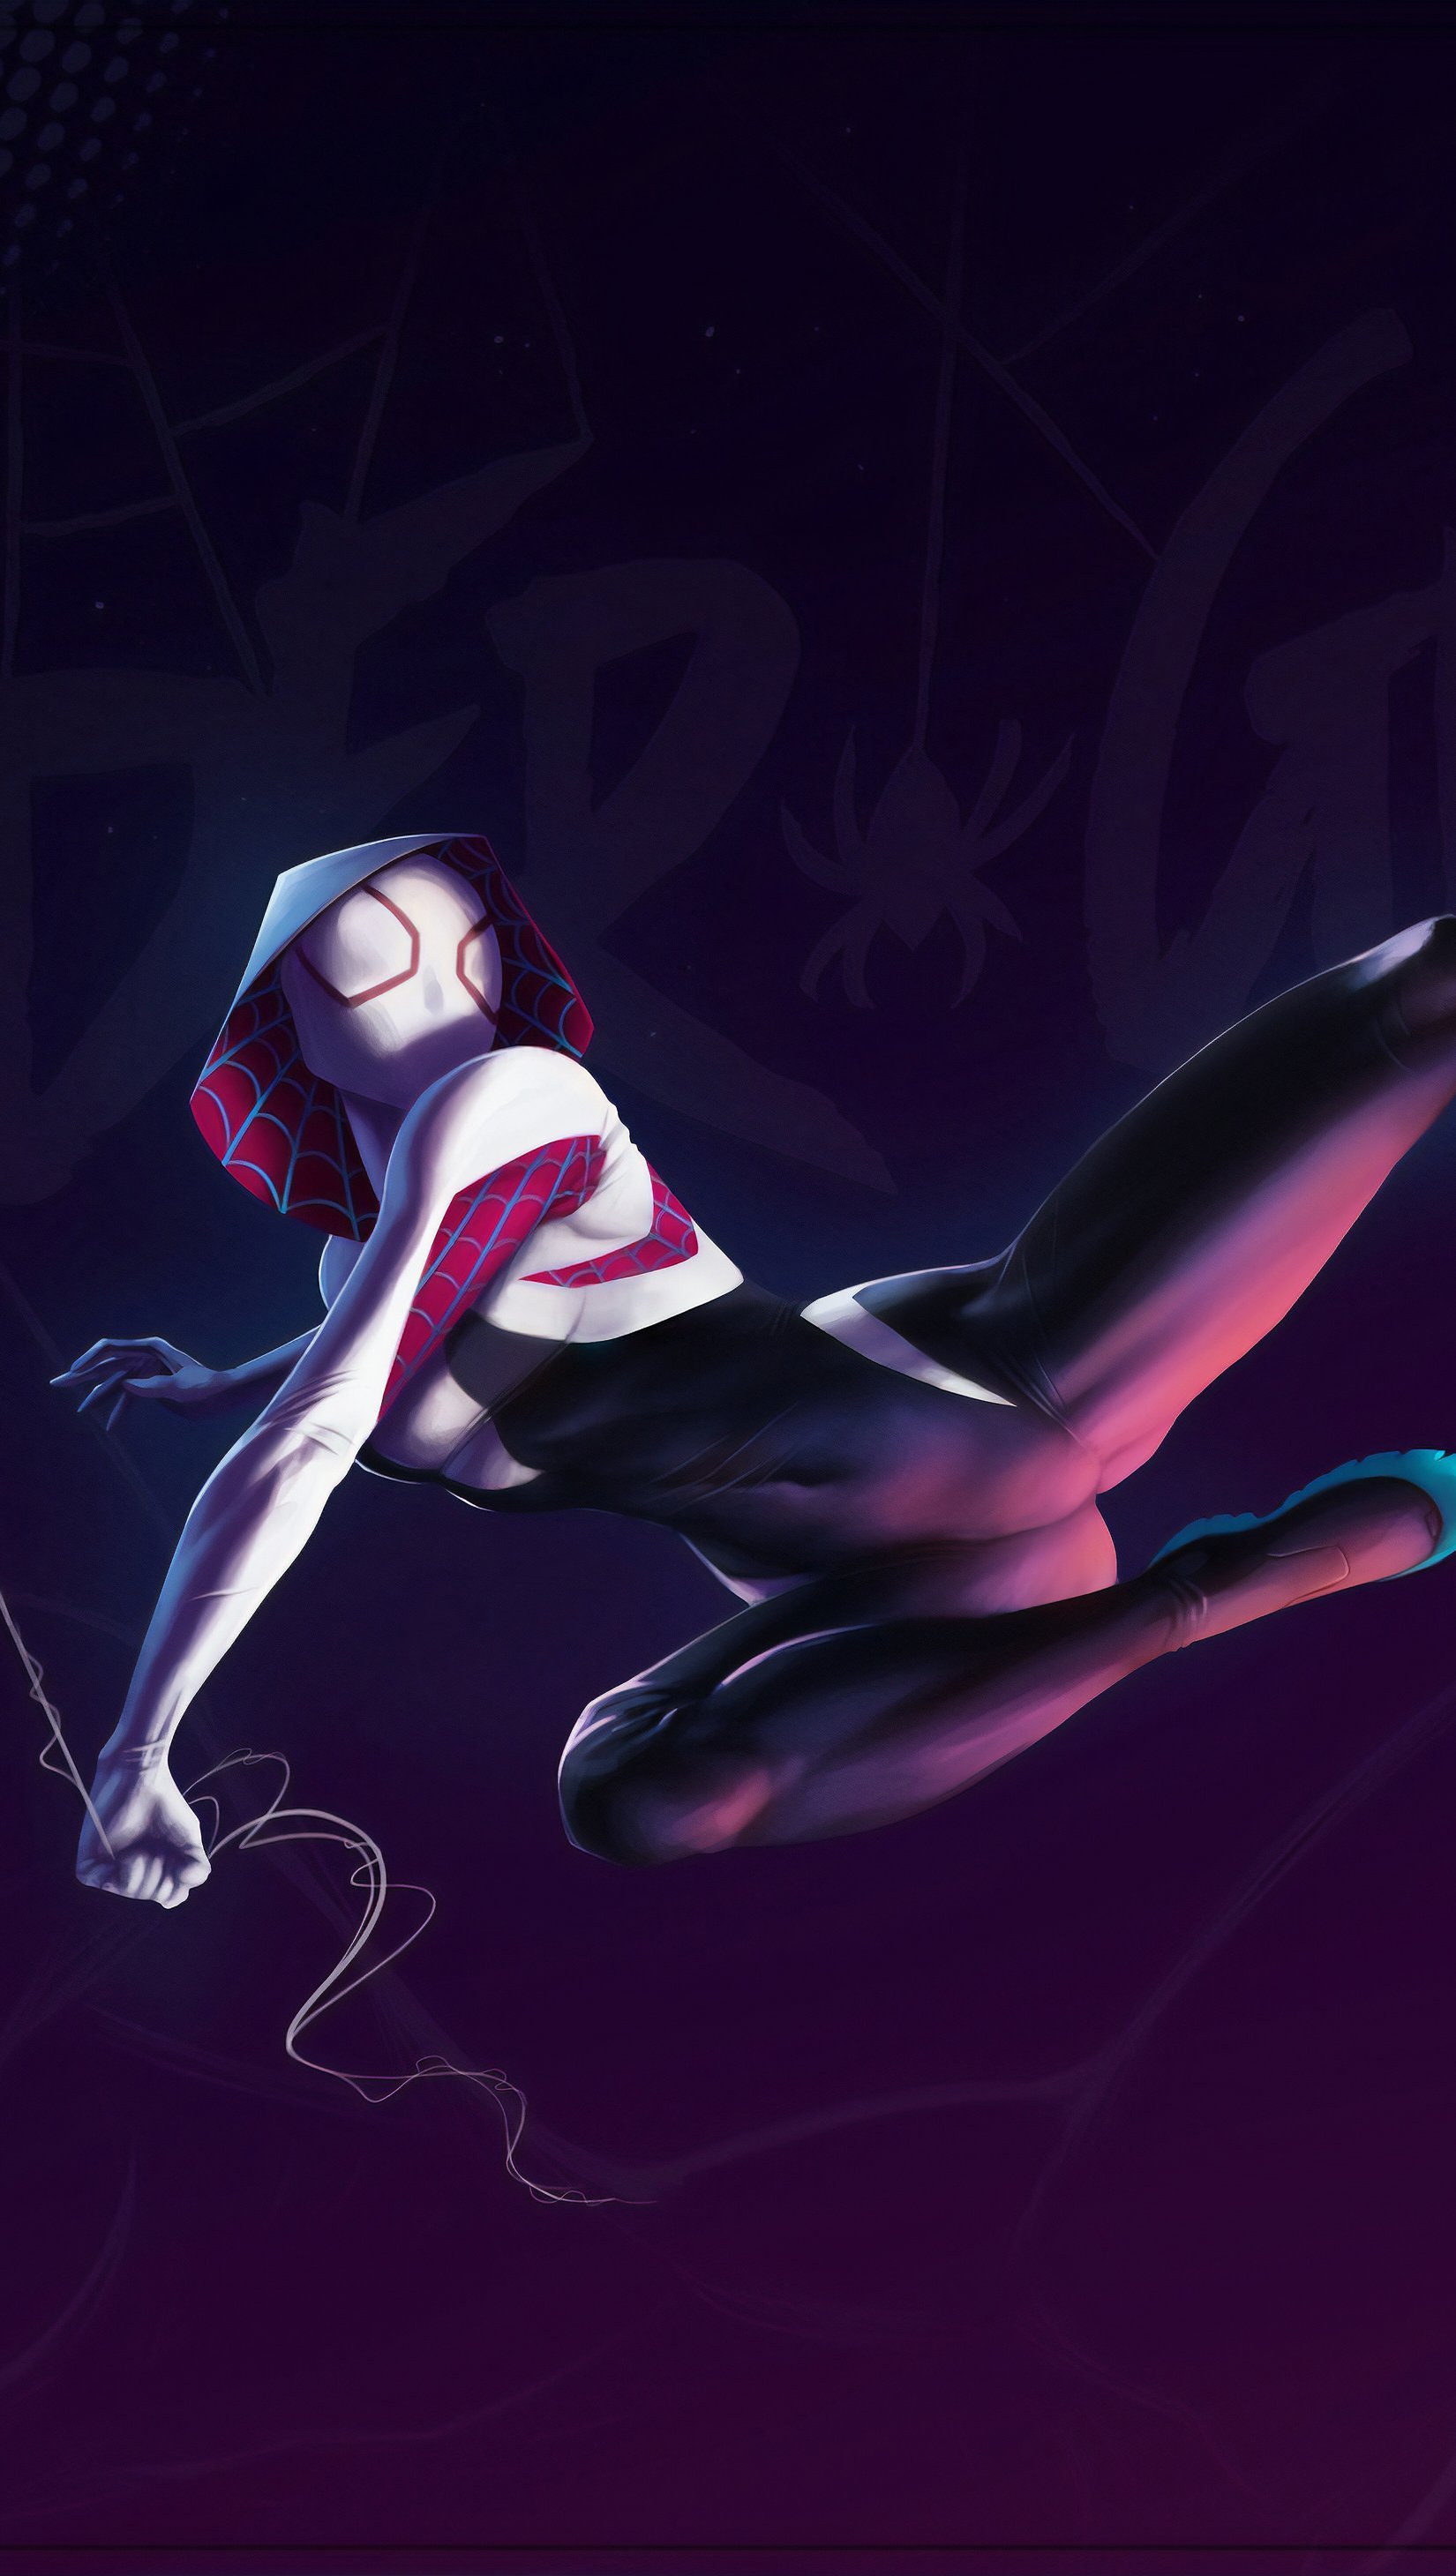 100+] Spider Gwen Pictures | Wallpapers.com